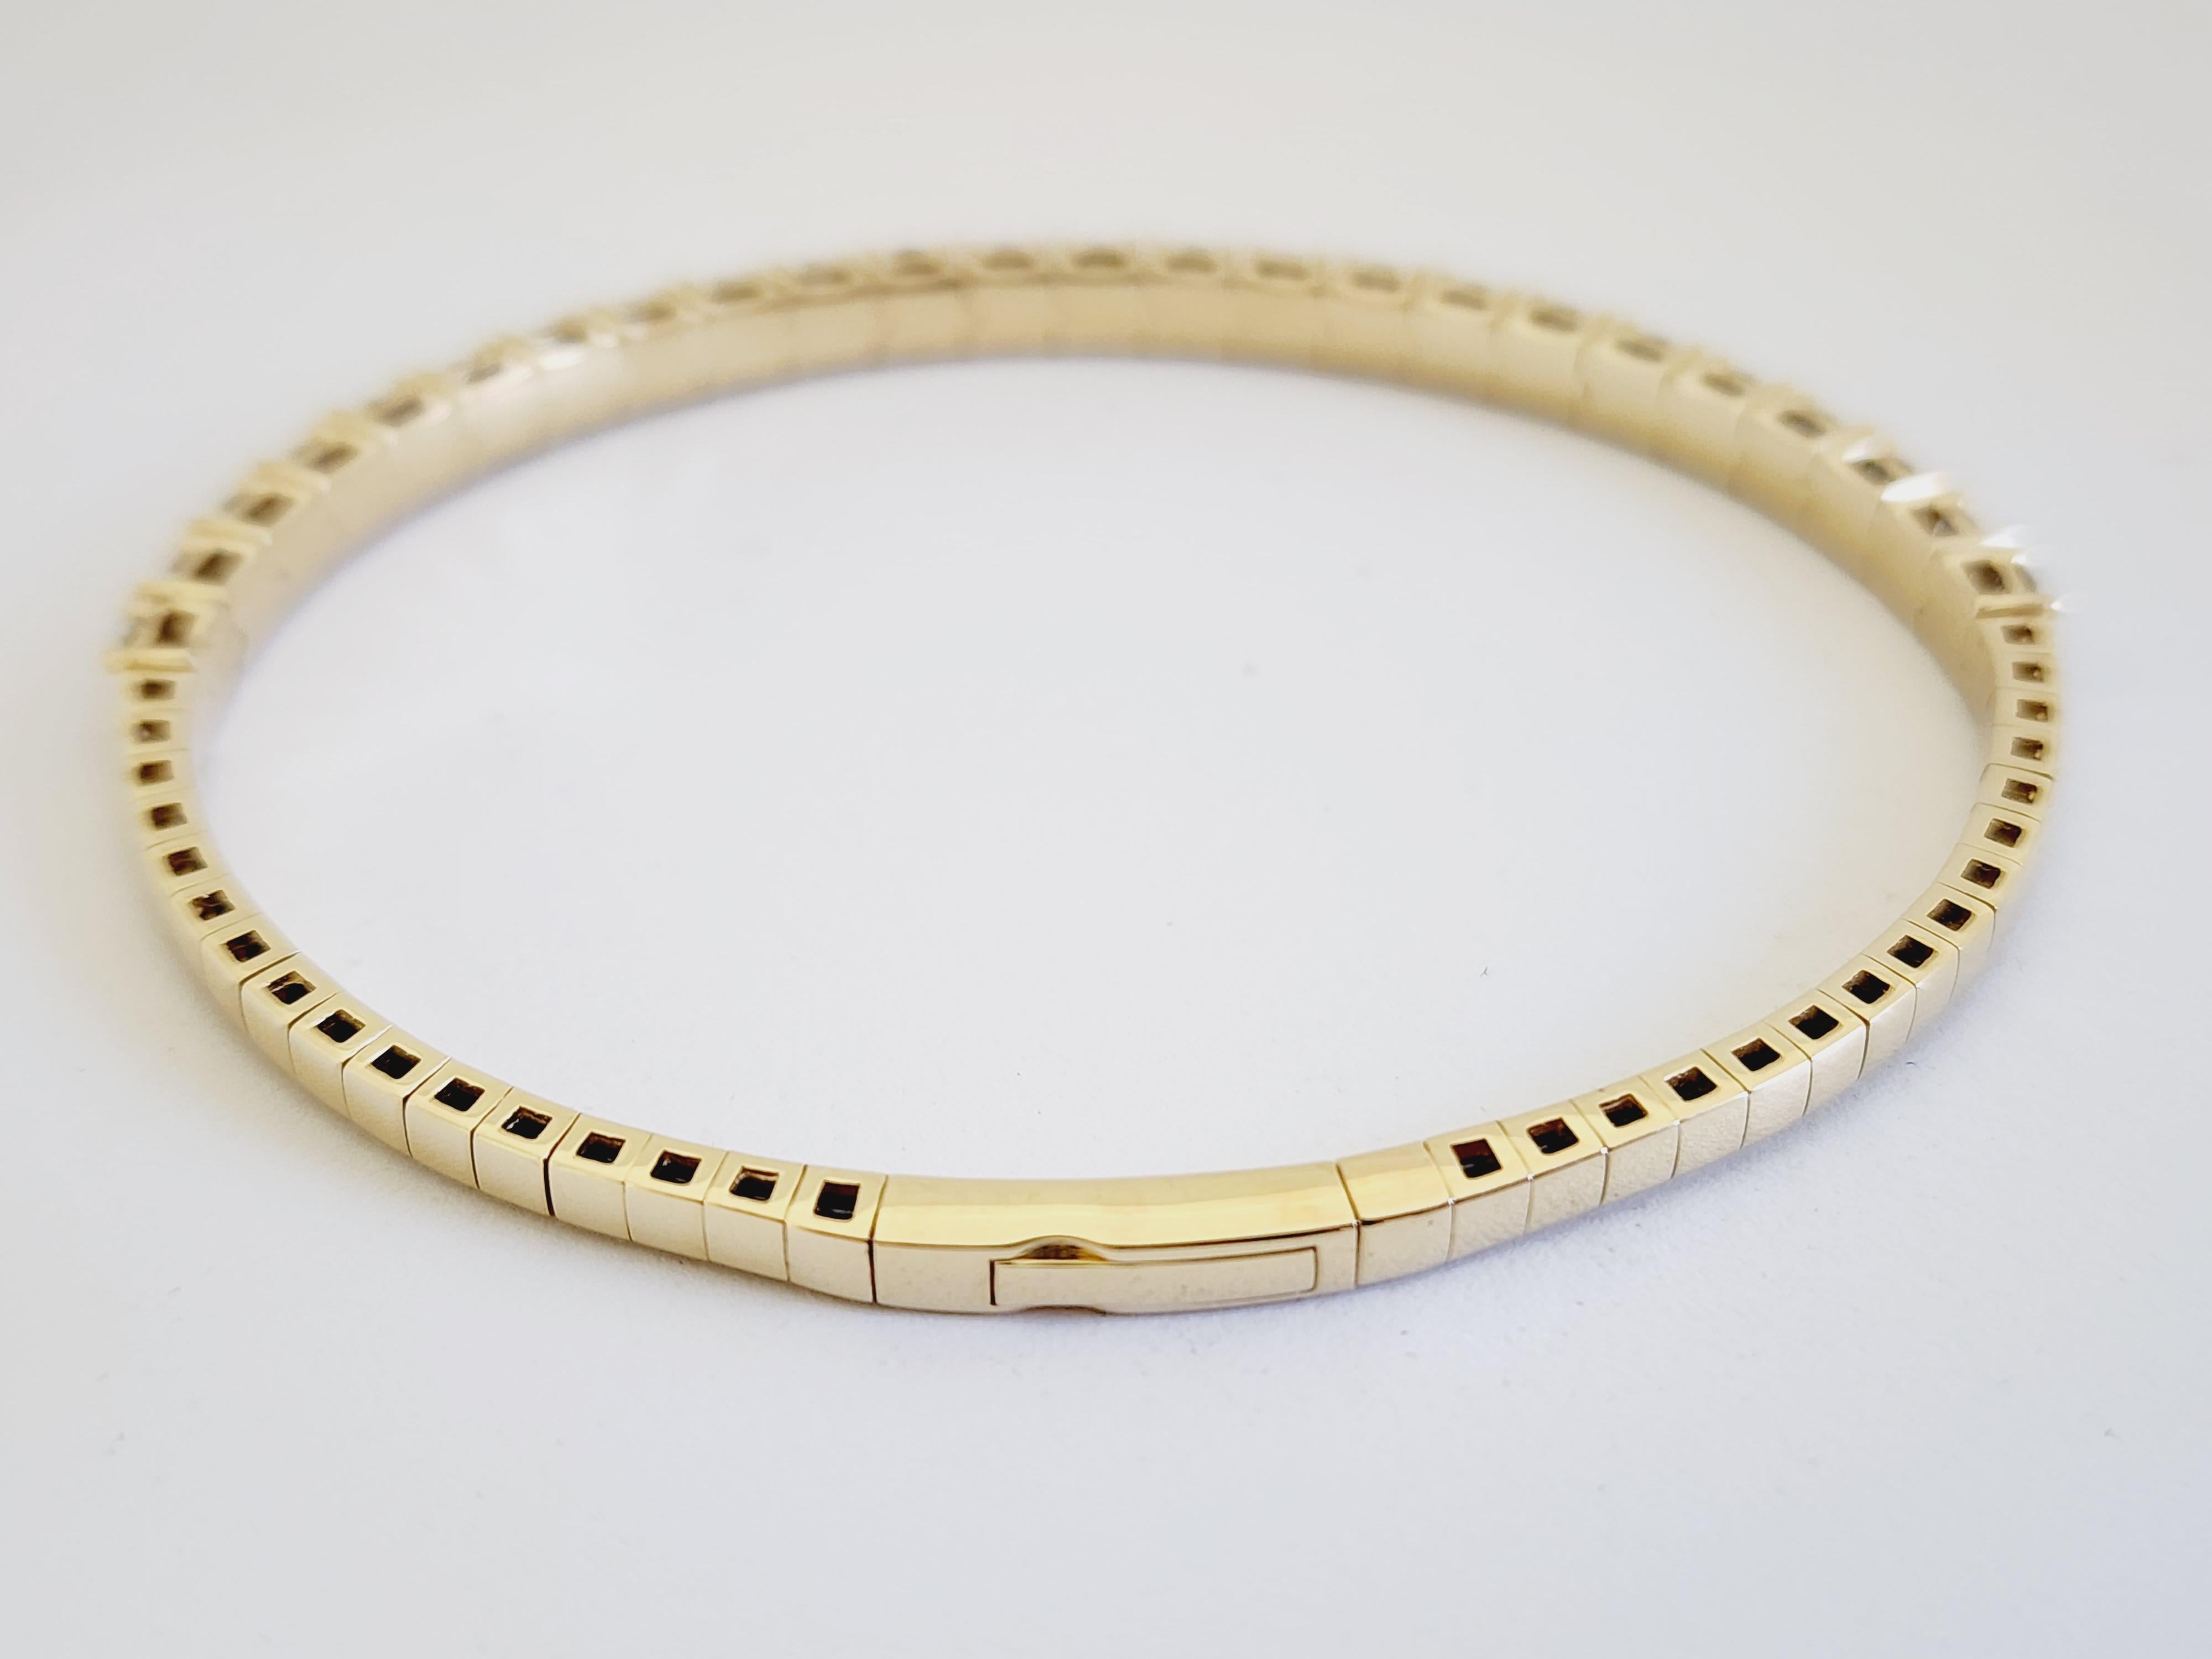 3.75 Carat Flexible Bangle Yellow Gold 14 Karat Bracelet In New Condition For Sale In Great Neck, NY